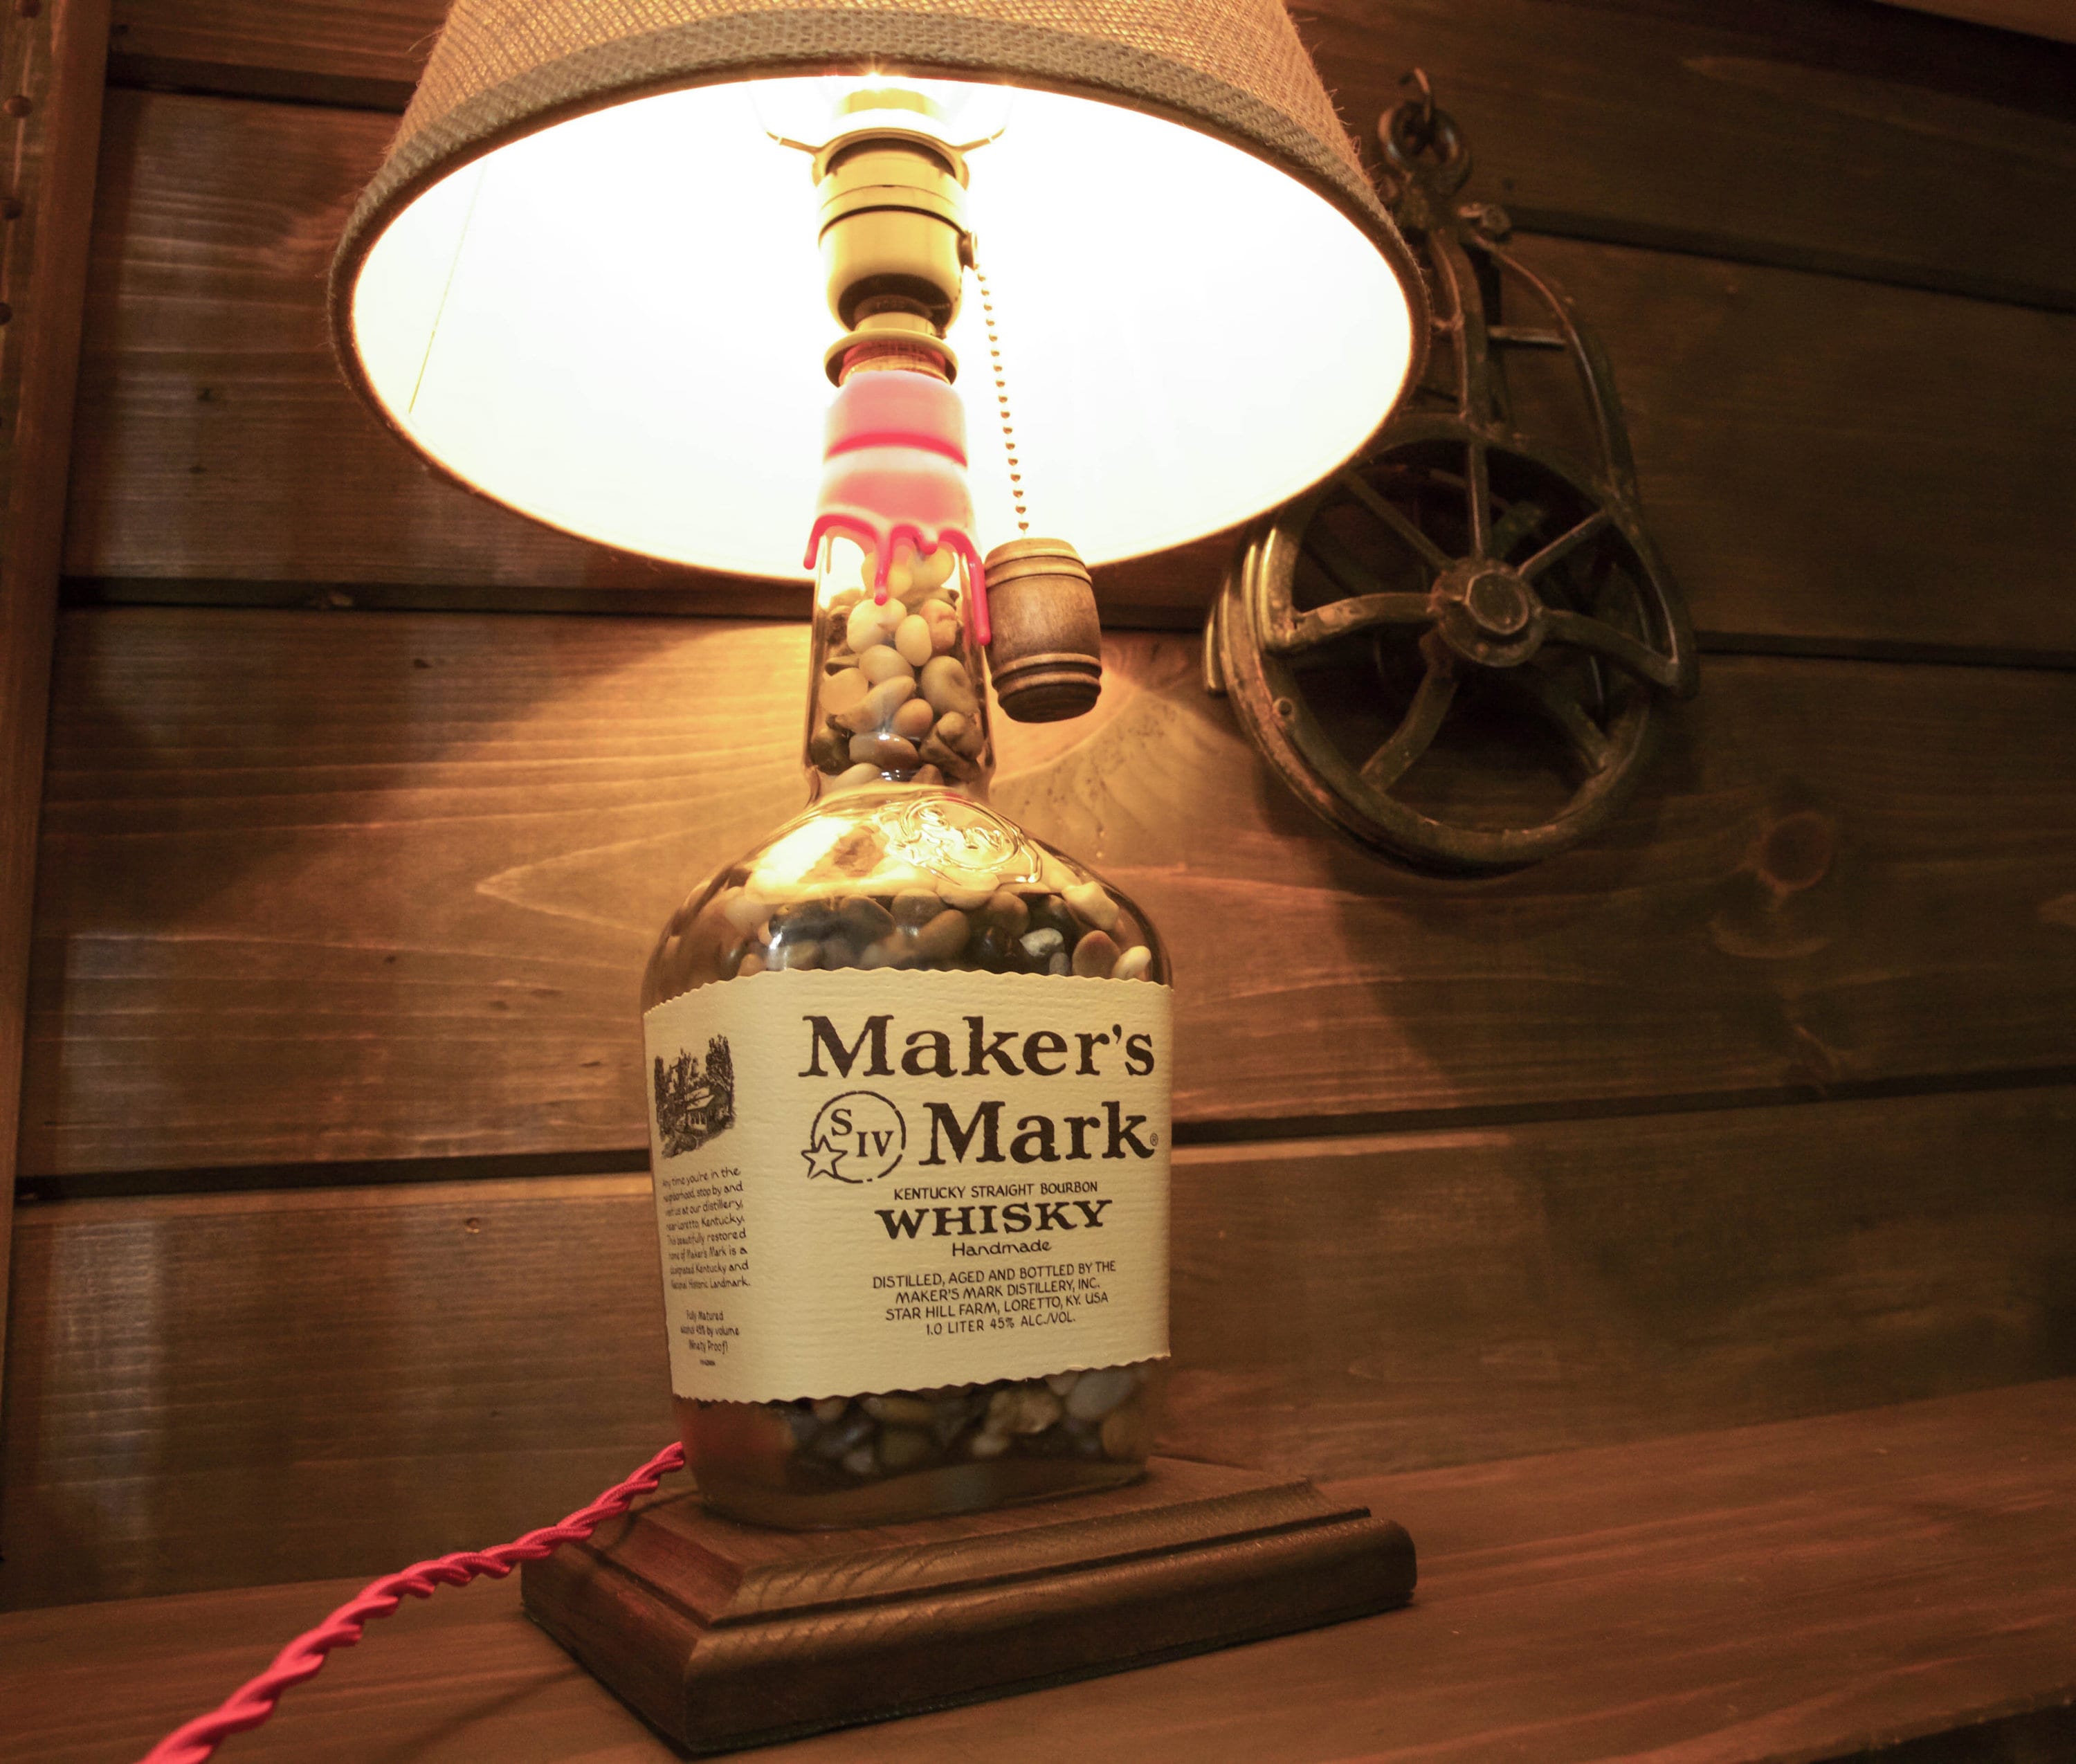 Woodford Reserve Bourbon Bottle Lamp whiskey Lamp/ Mancave / Fathers Day  Gift / Gifts for Him / Groomsmen Gift 